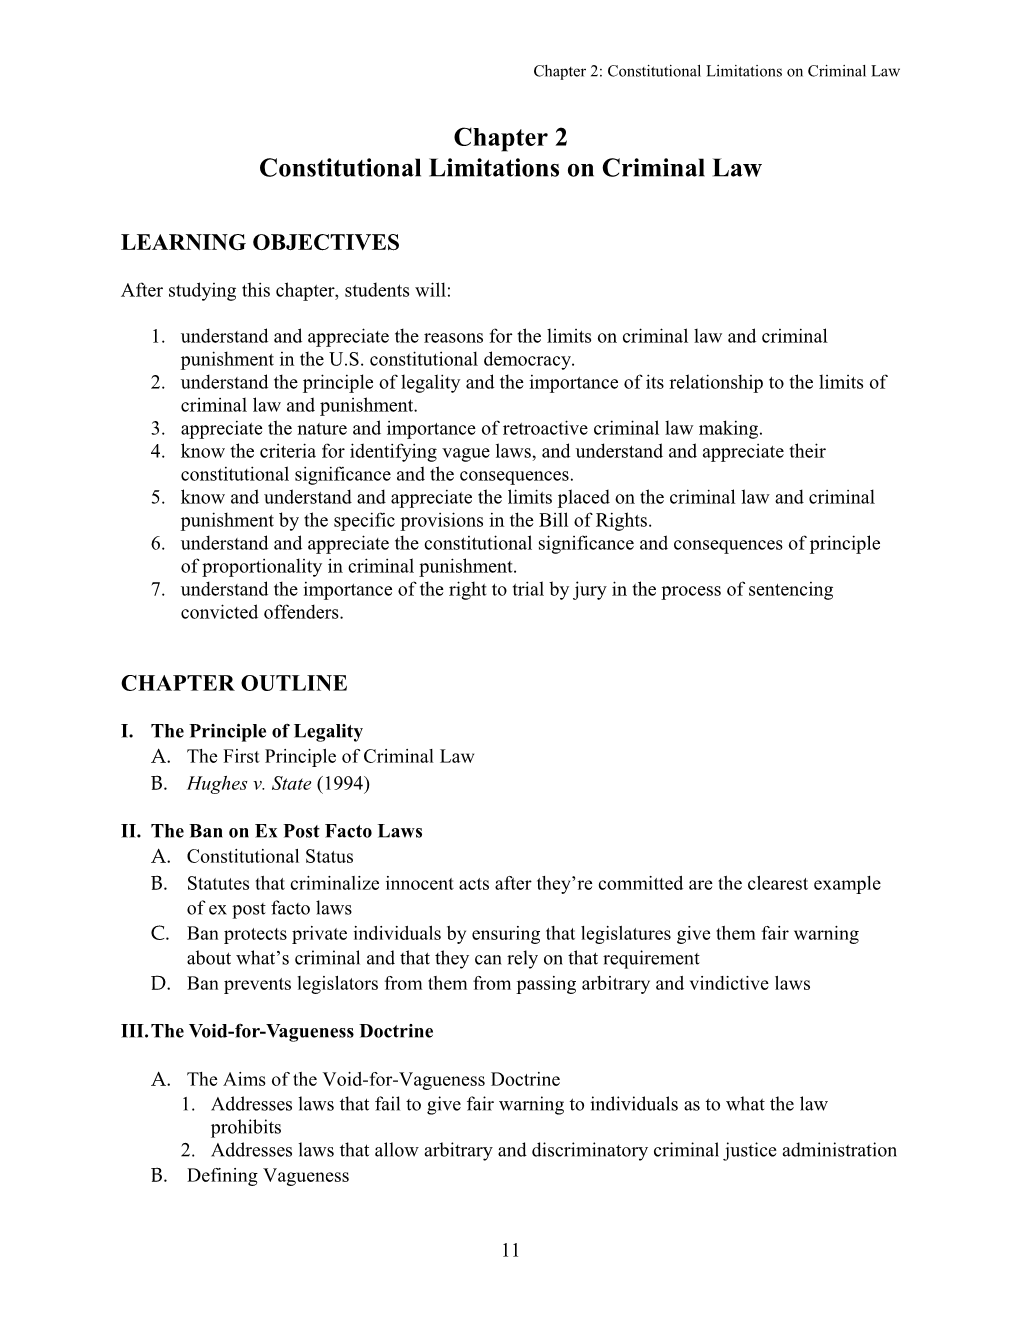 Constitutional Limitations on Criminal Law